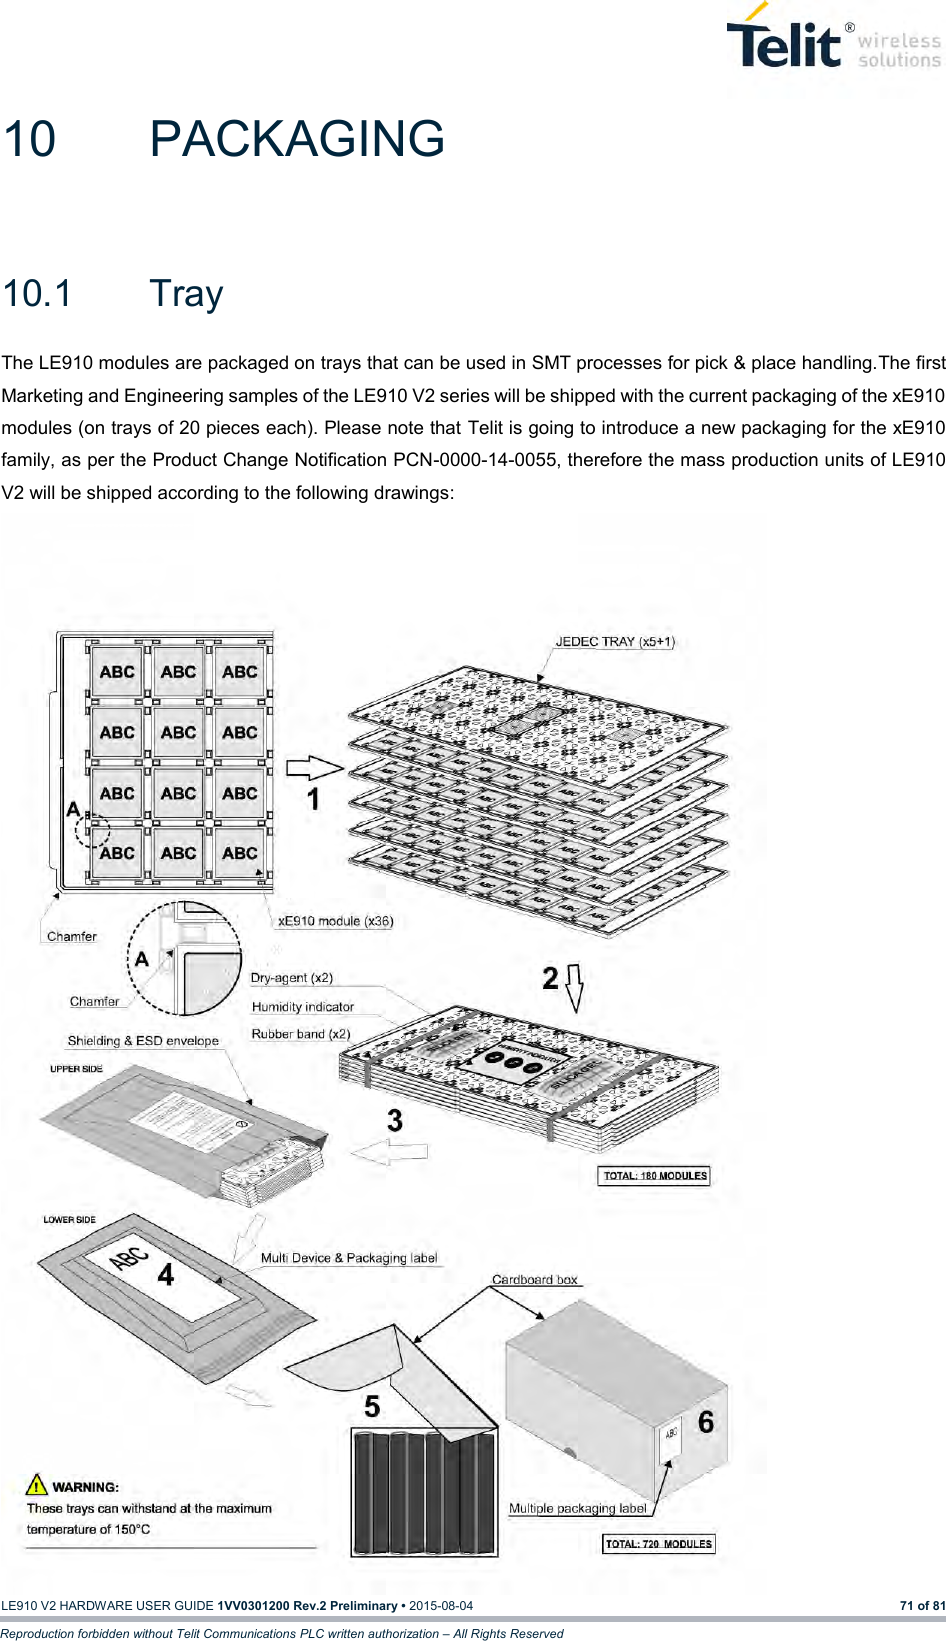   LE910 V2 HARDWARE USER GUIDE 1VV0301200 Rev.2 Preliminary • 2015-08-04 71 of 81 Reproduction forbidden without Telit Communications PLC written authorization – All Rights Reserved 10  PACKAGING 10.1  Tray The LE910 modules are packaged on trays that can be used in SMT processes for pick &amp; place handling.The first Marketing and Engineering samples of the LE910 V2 series will be shipped with the current packaging of the xE910 modules (on trays of 20 pieces each). Please note that Telit is going to introduce a new packaging for the xE910 family, as per the Product Change Notification PCN-0000-14-0055, therefore the mass production units of LE910 V2 will be shipped according to the following drawings:  